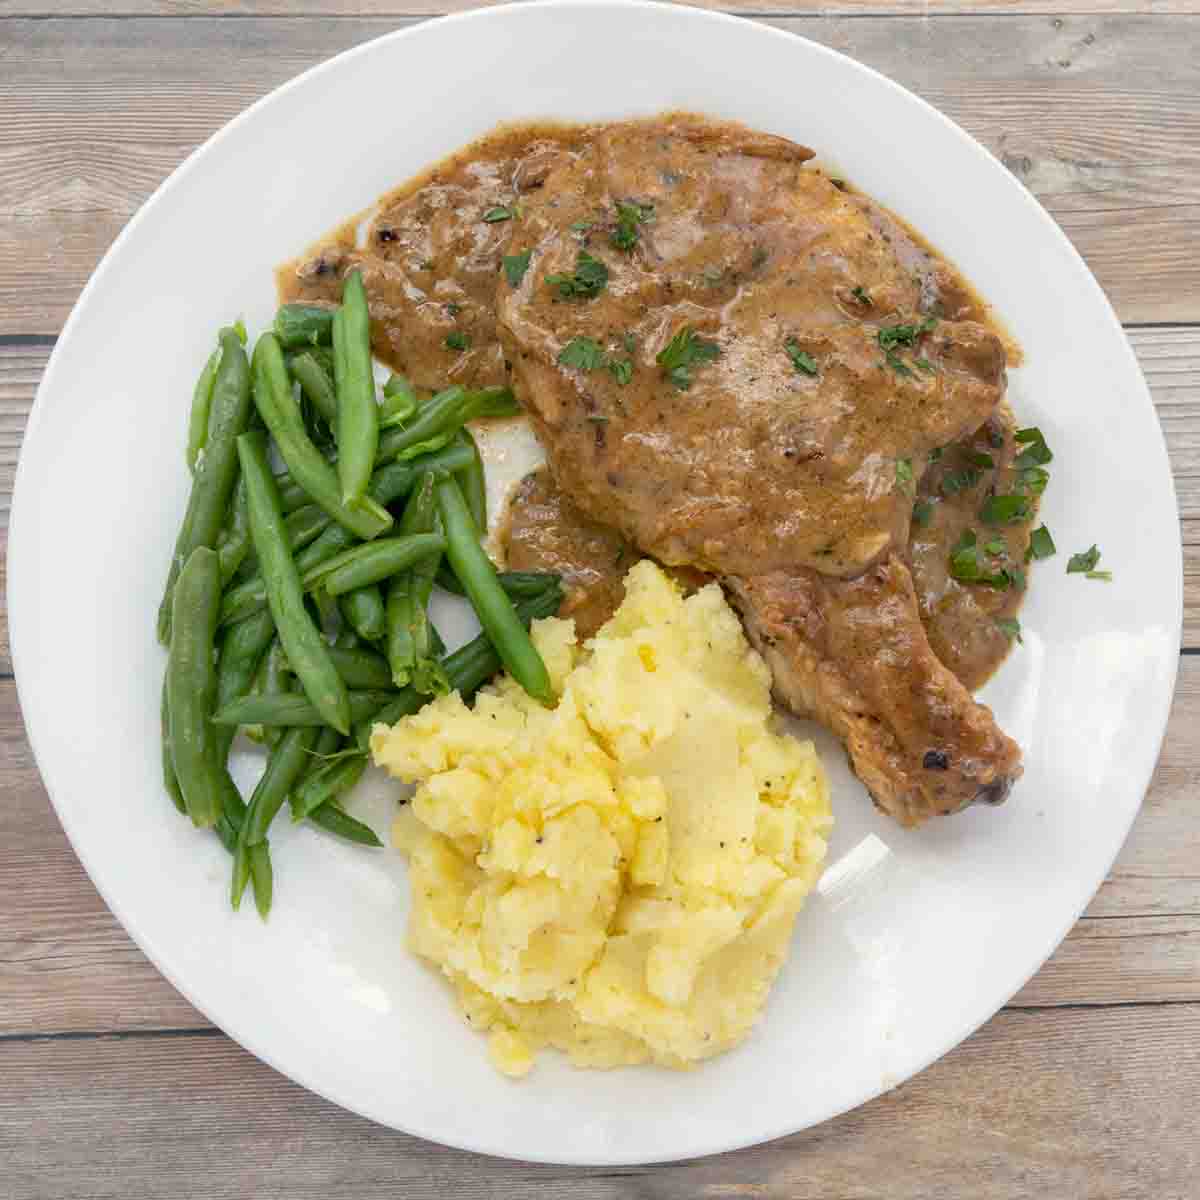 smothered pork chop on white plate with mashed potatoes and green beans.